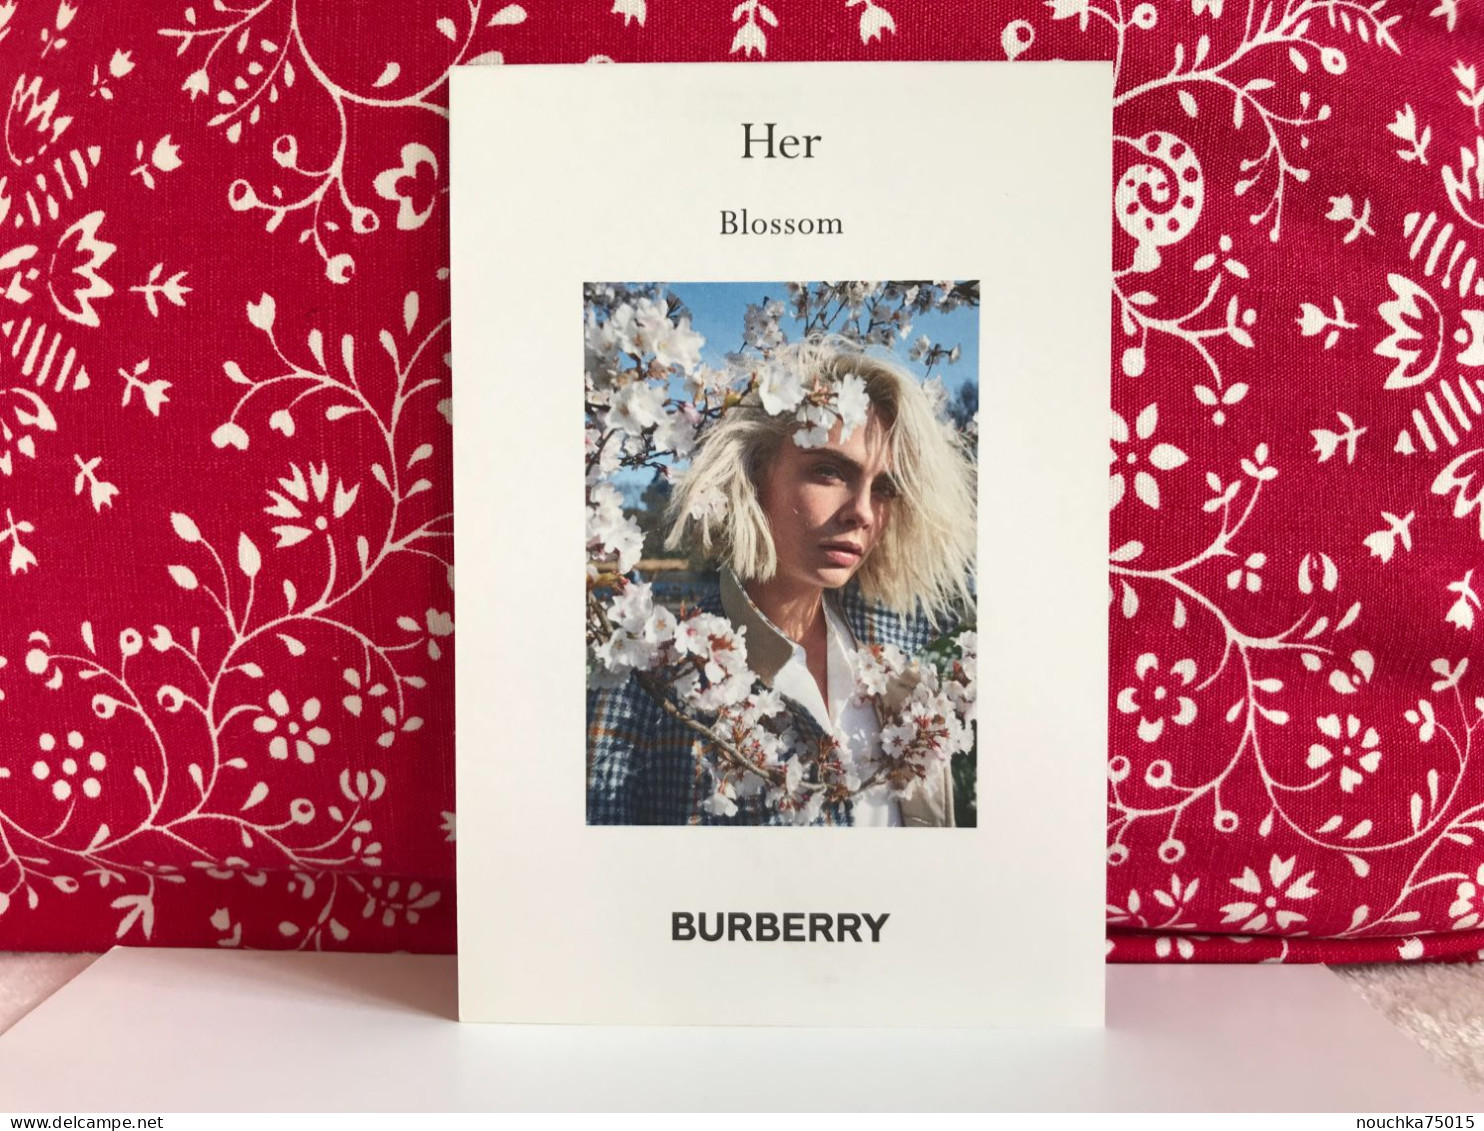 Burberry - Her Blossom - Modern (from 1961)